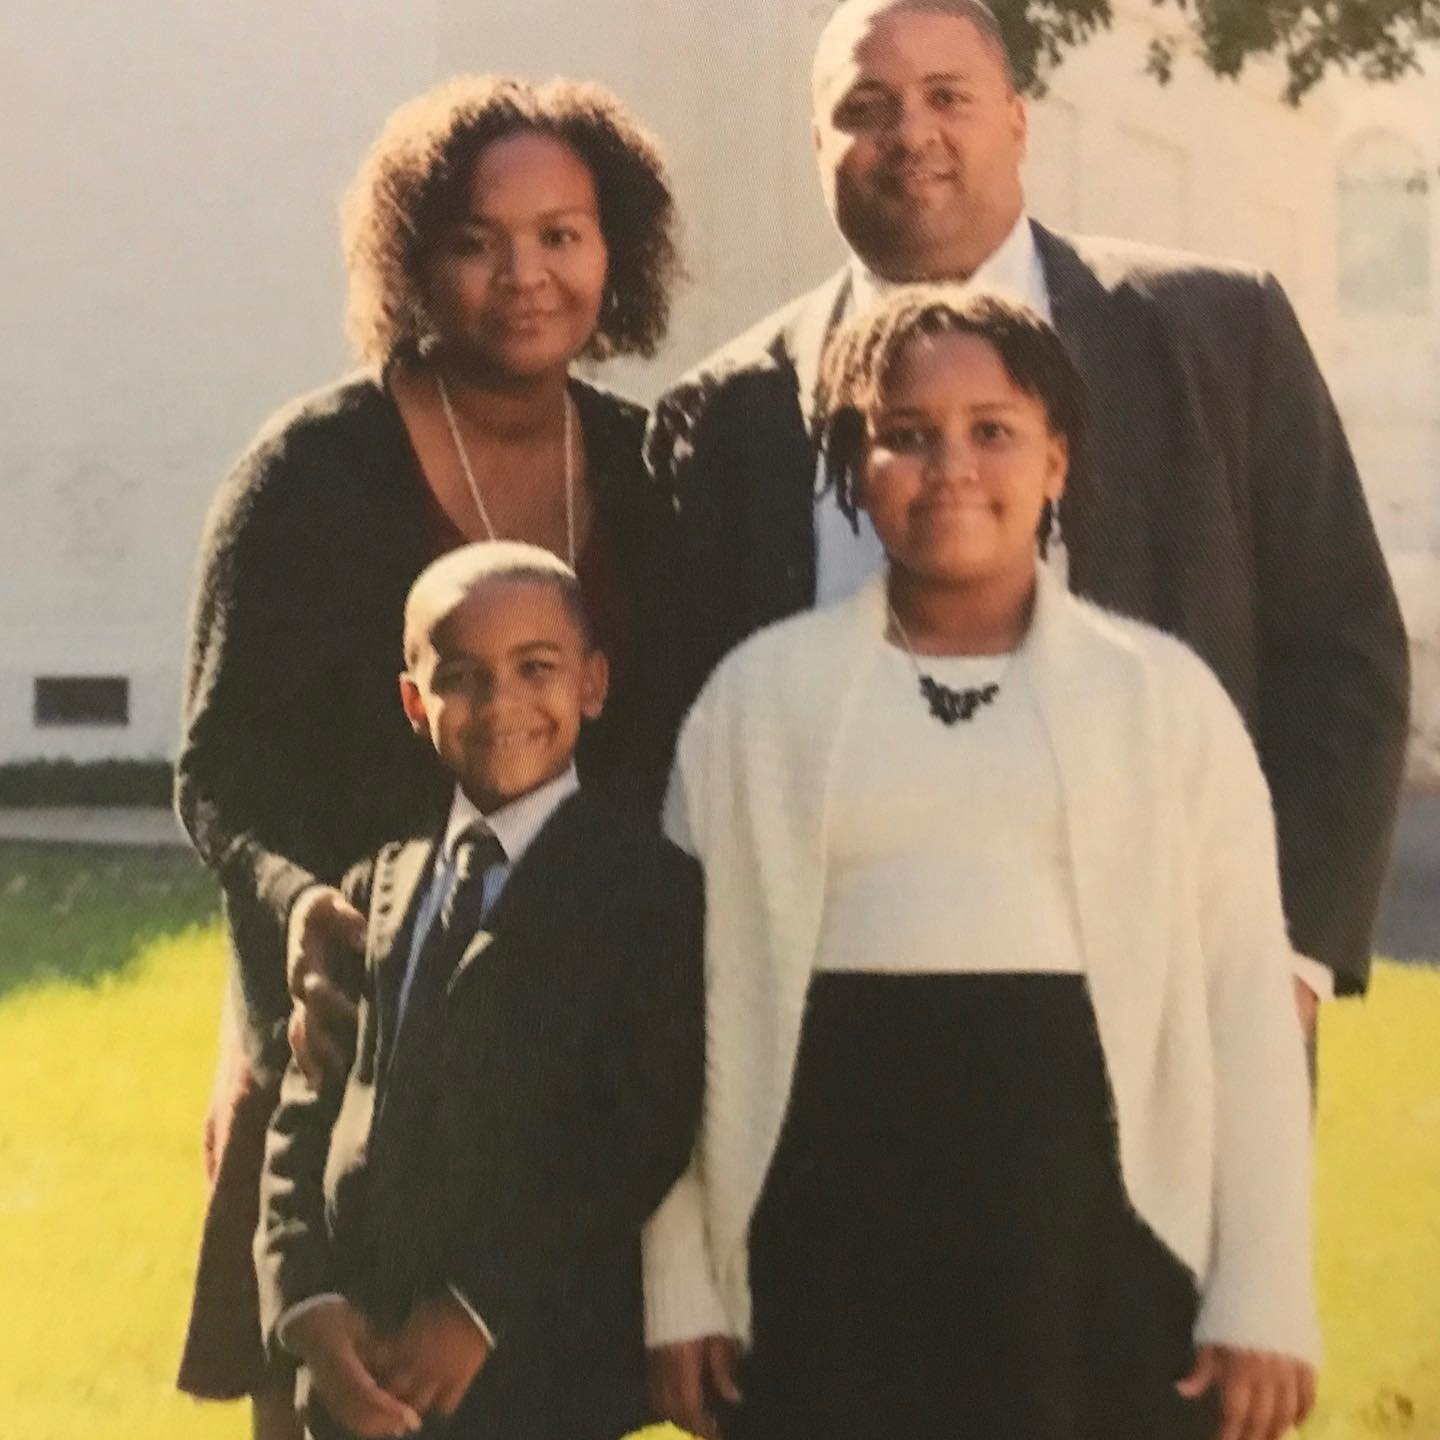 An old picture of Alvin Bragg with his wife, Jamila Ponton Bragg, and their children